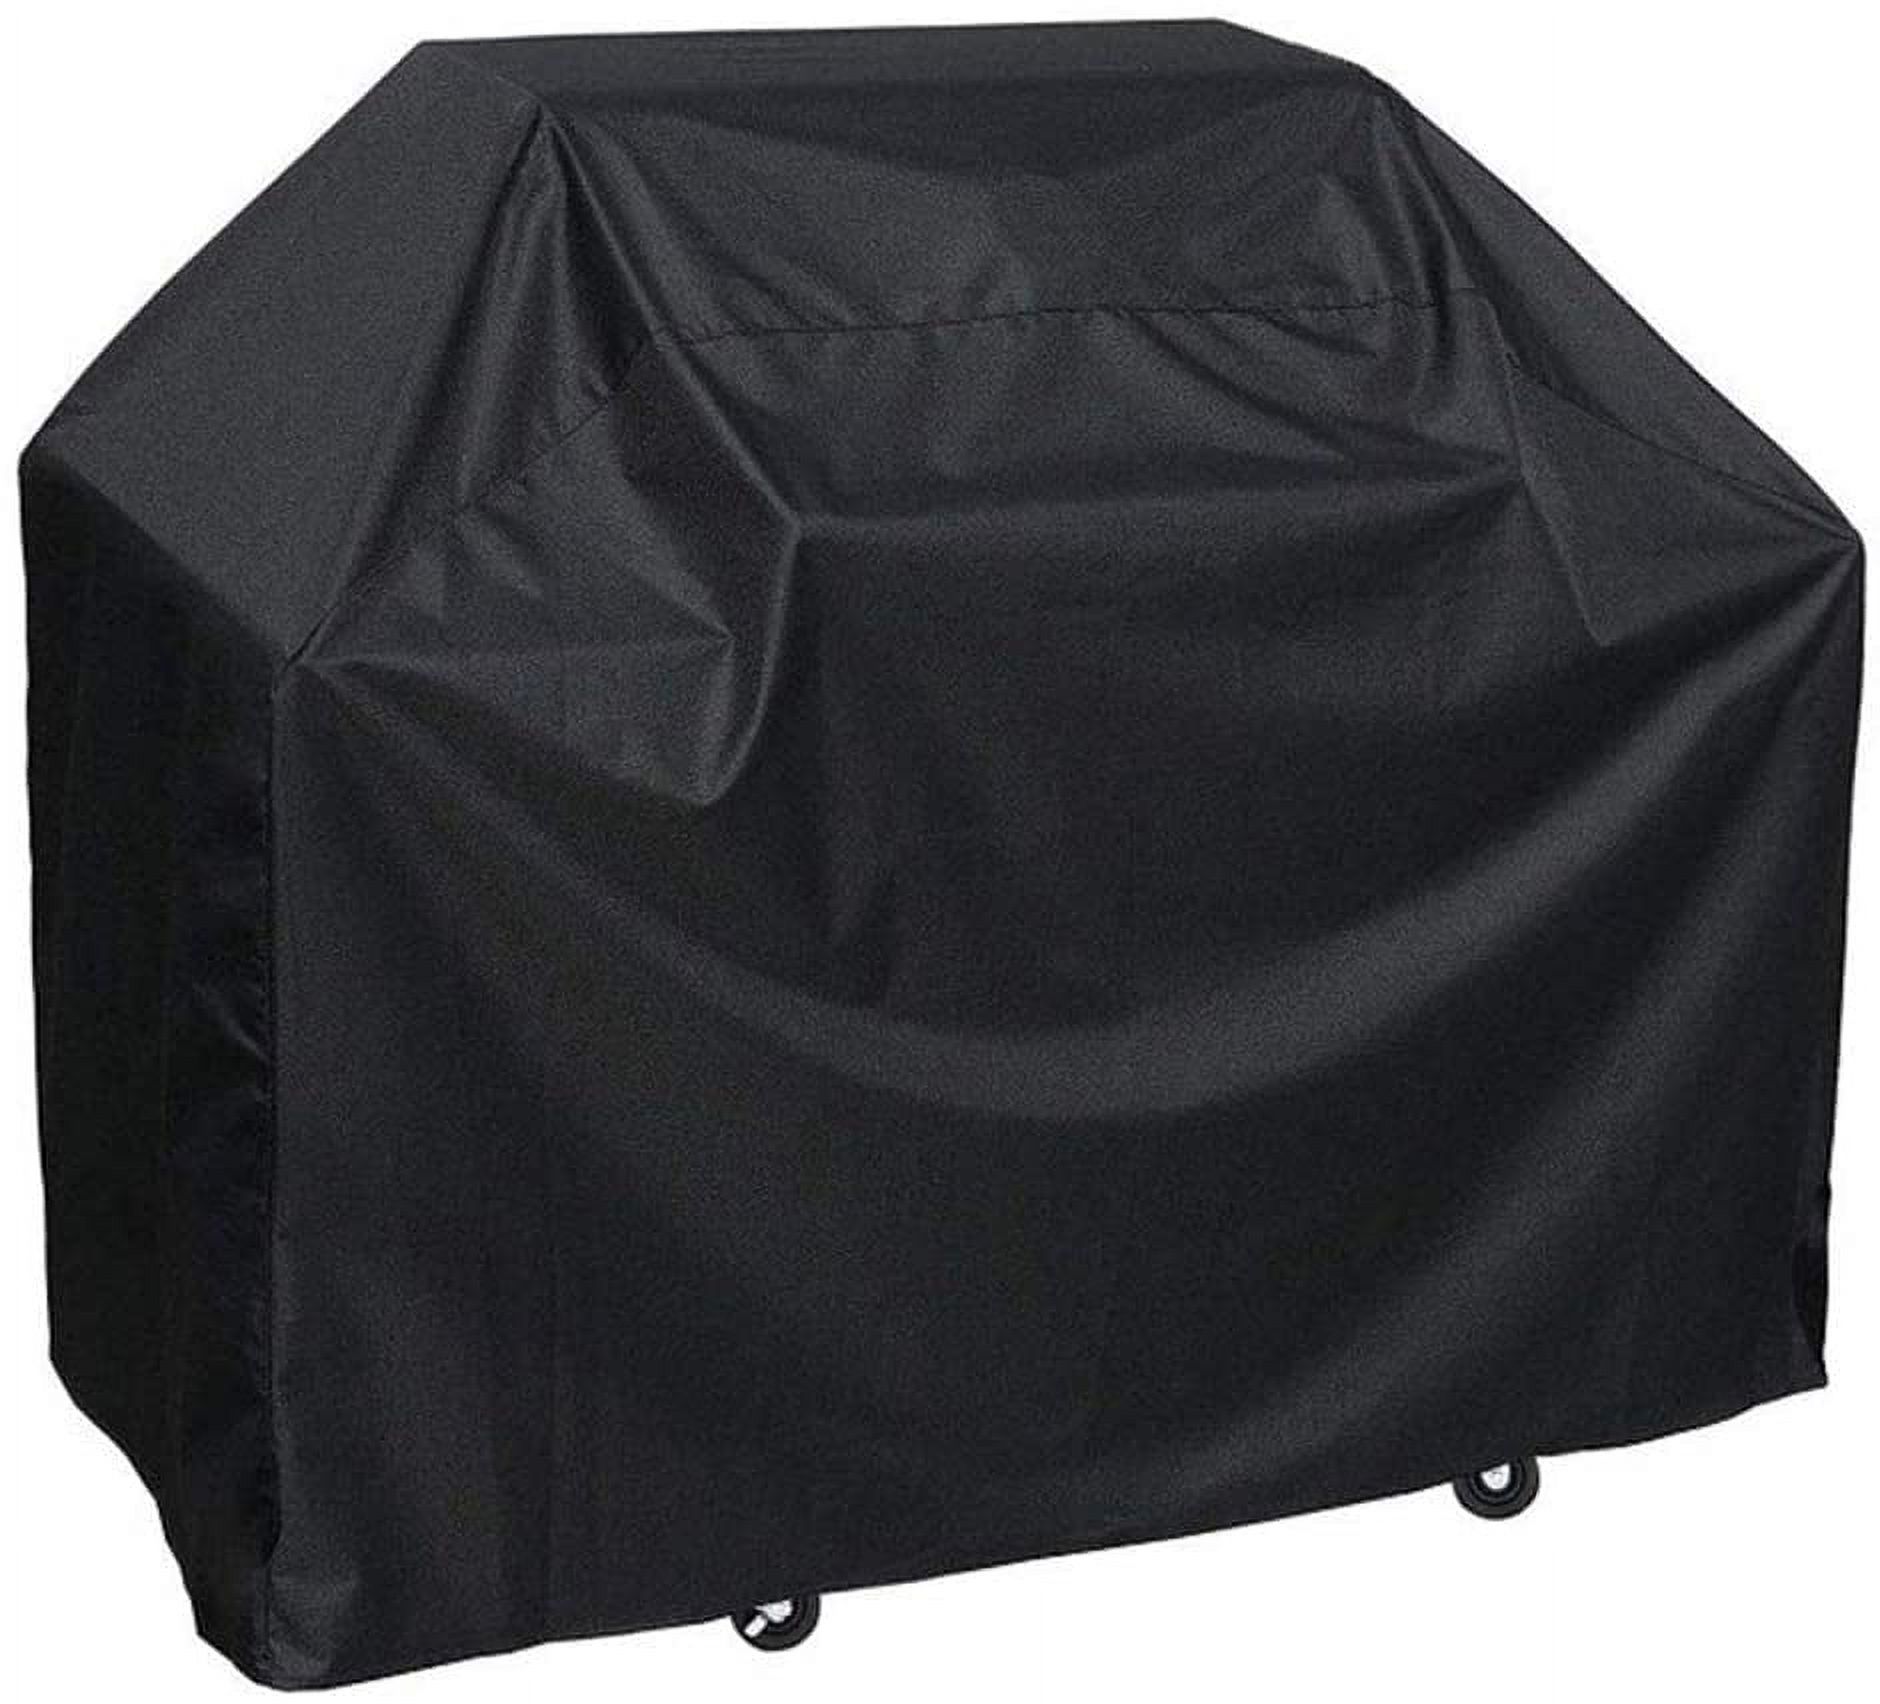 BBQ Grill Cover, 58-inch Waterproof Heavy-Duty Premium BBQ Grill Cover Gas Barbeque Grill Cover -Large((L:58" W: 24" H:46") Black - image 1 of 8